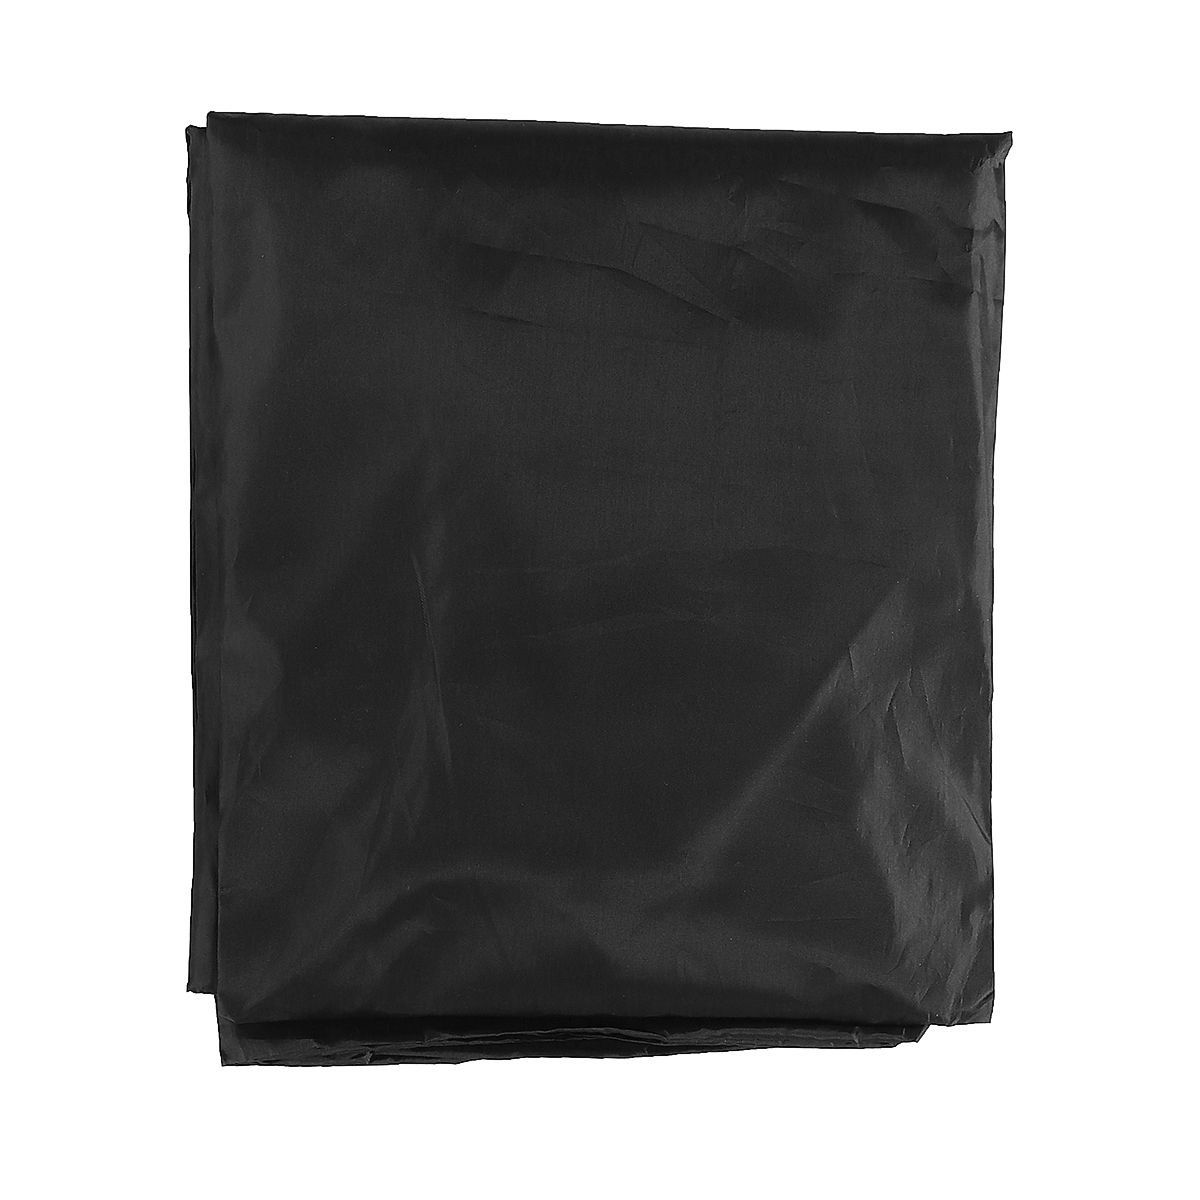 Waterproof-Barbecue-Grill-Cover-for-Weber-7146-Performer-Premium-and-Deluxe-1576280-6